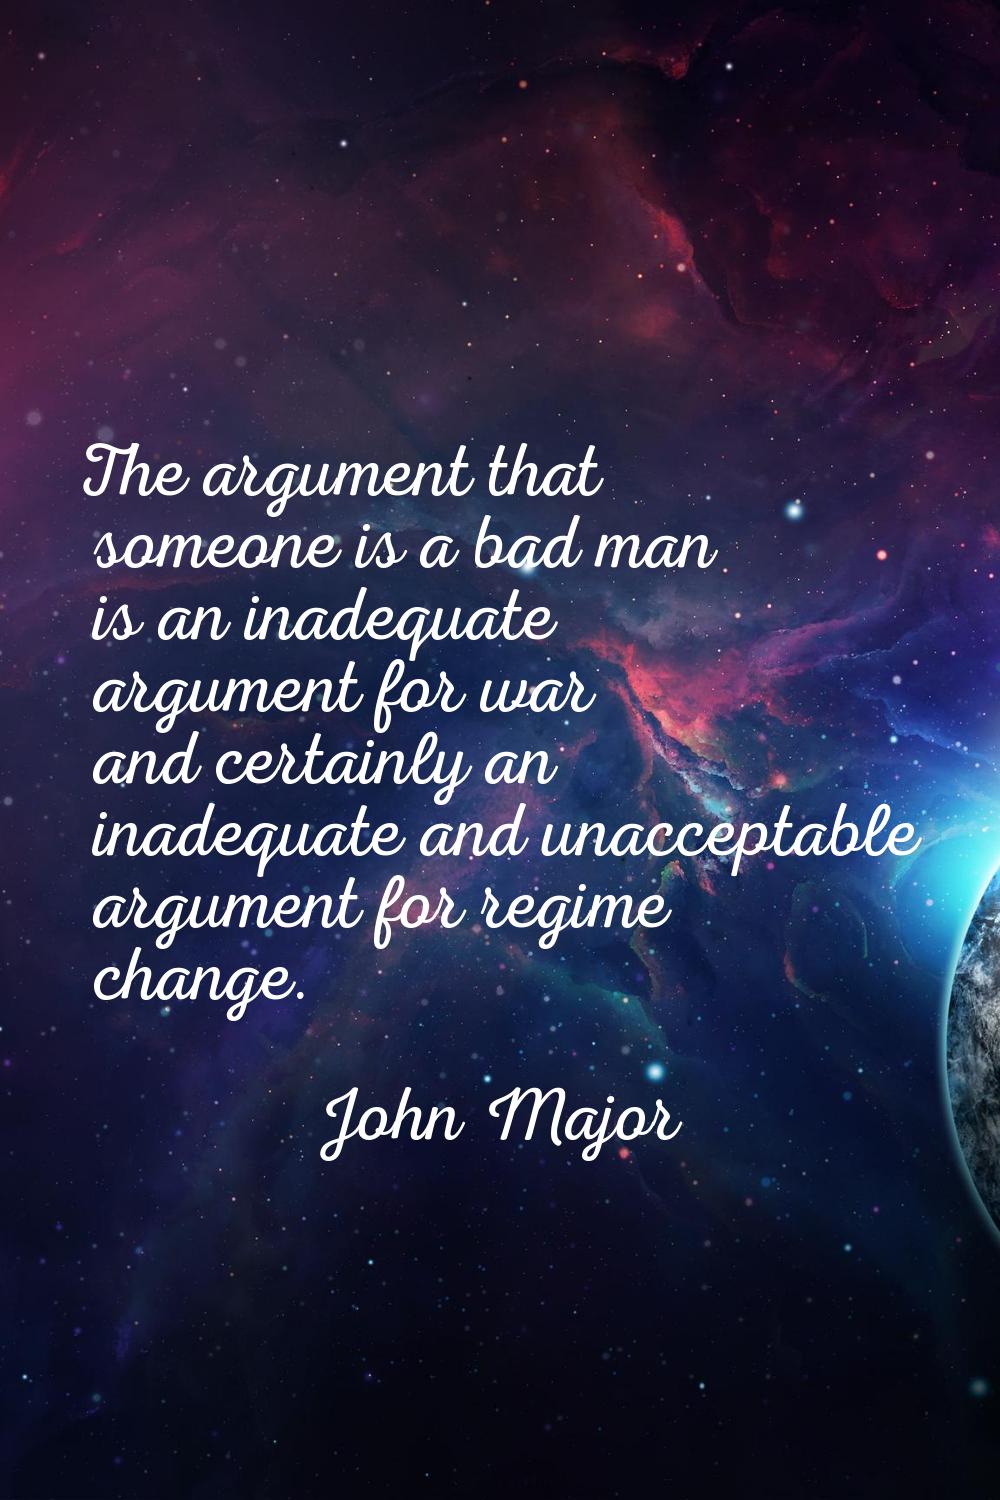 The argument that someone is a bad man is an inadequate argument for war and certainly an inadequat